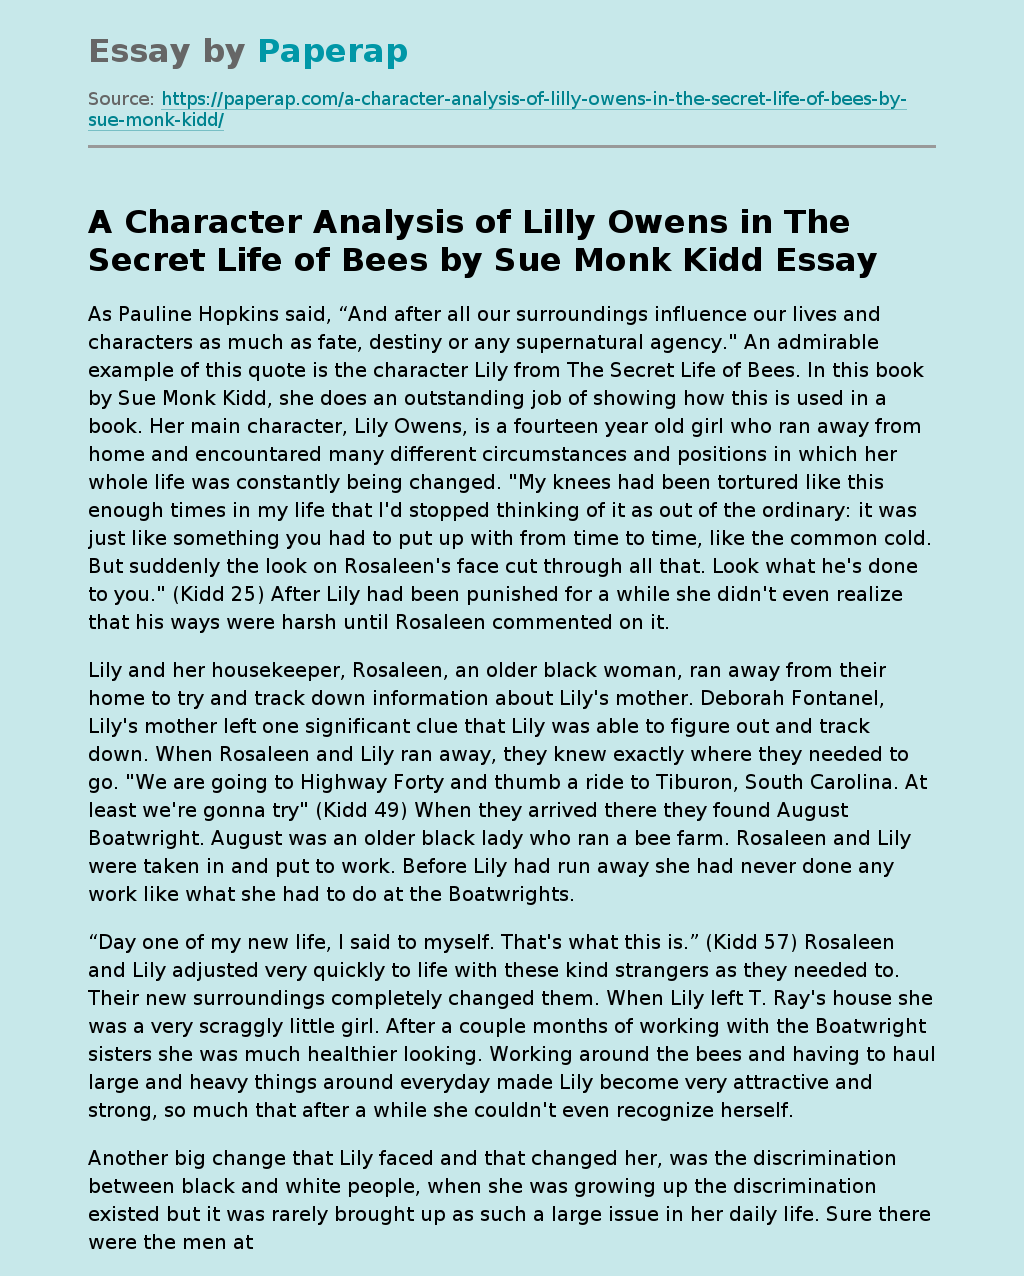 A Character Analysis of Lilly Owens in The Secret Life of Bees by Sue Monk Kidd